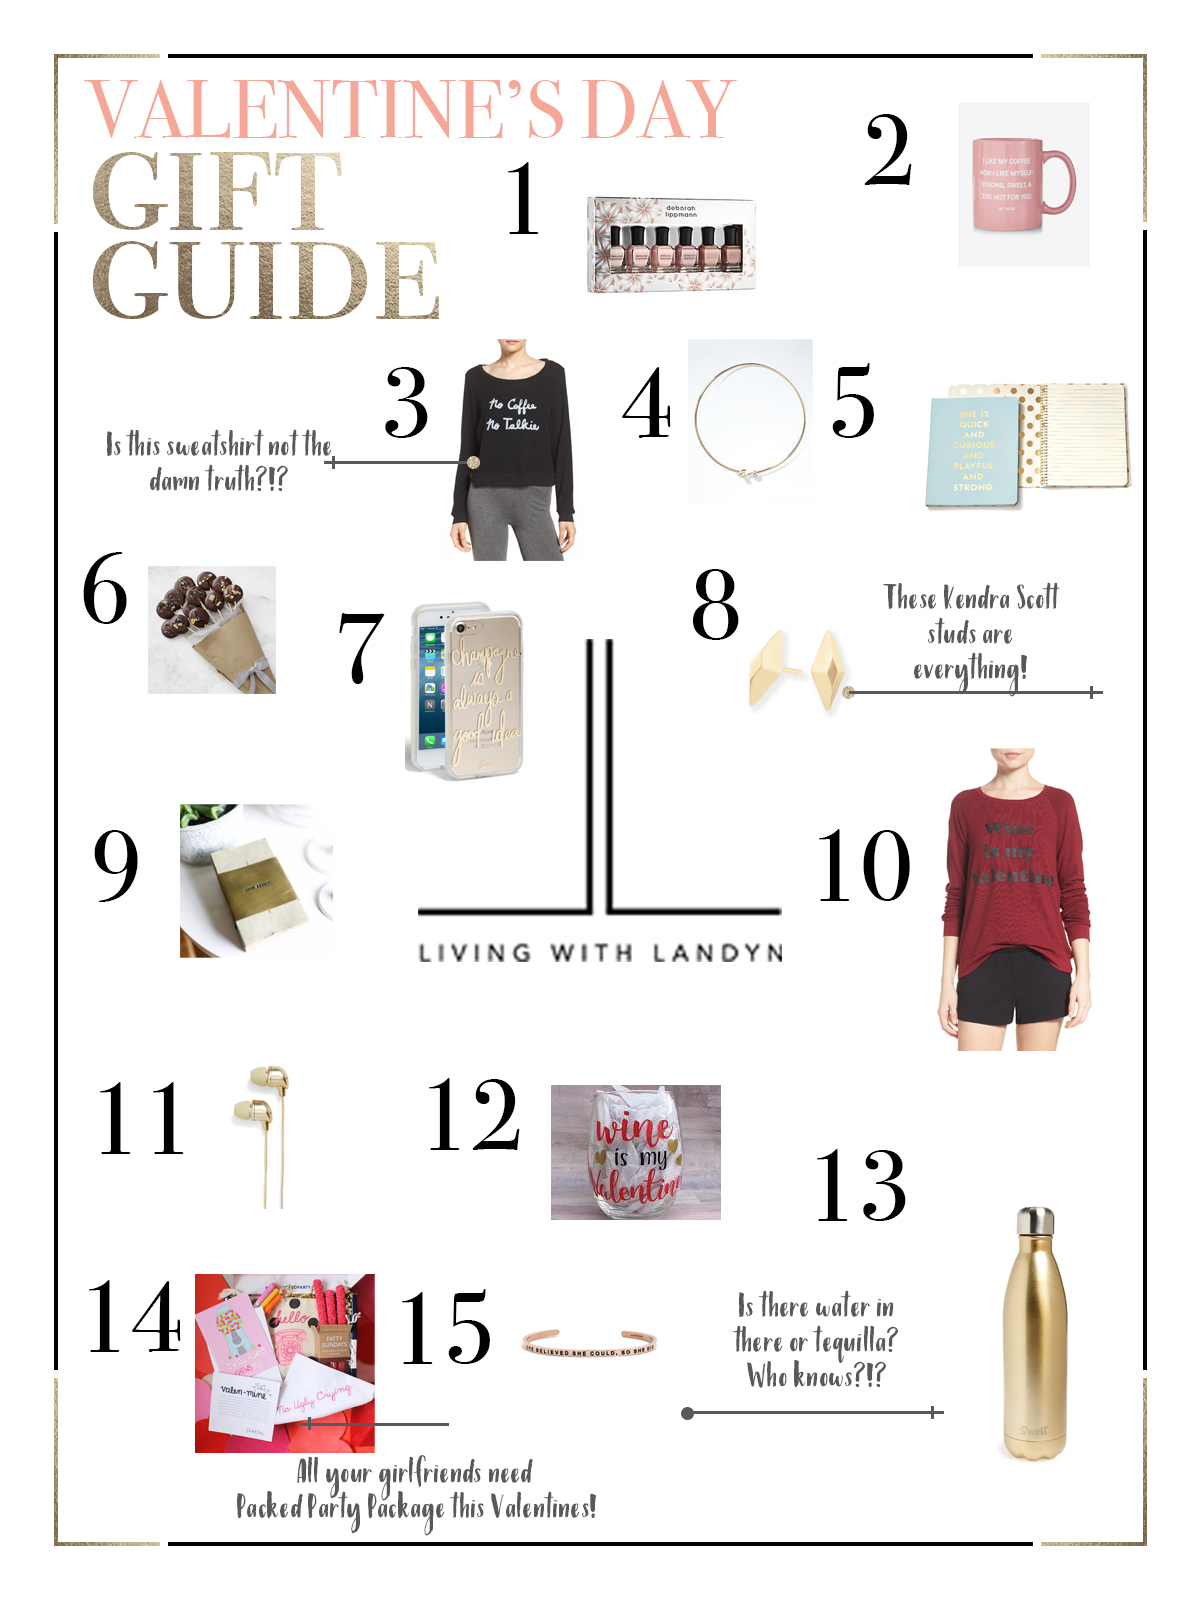  GALENTINE'S GIFT GUIDE 